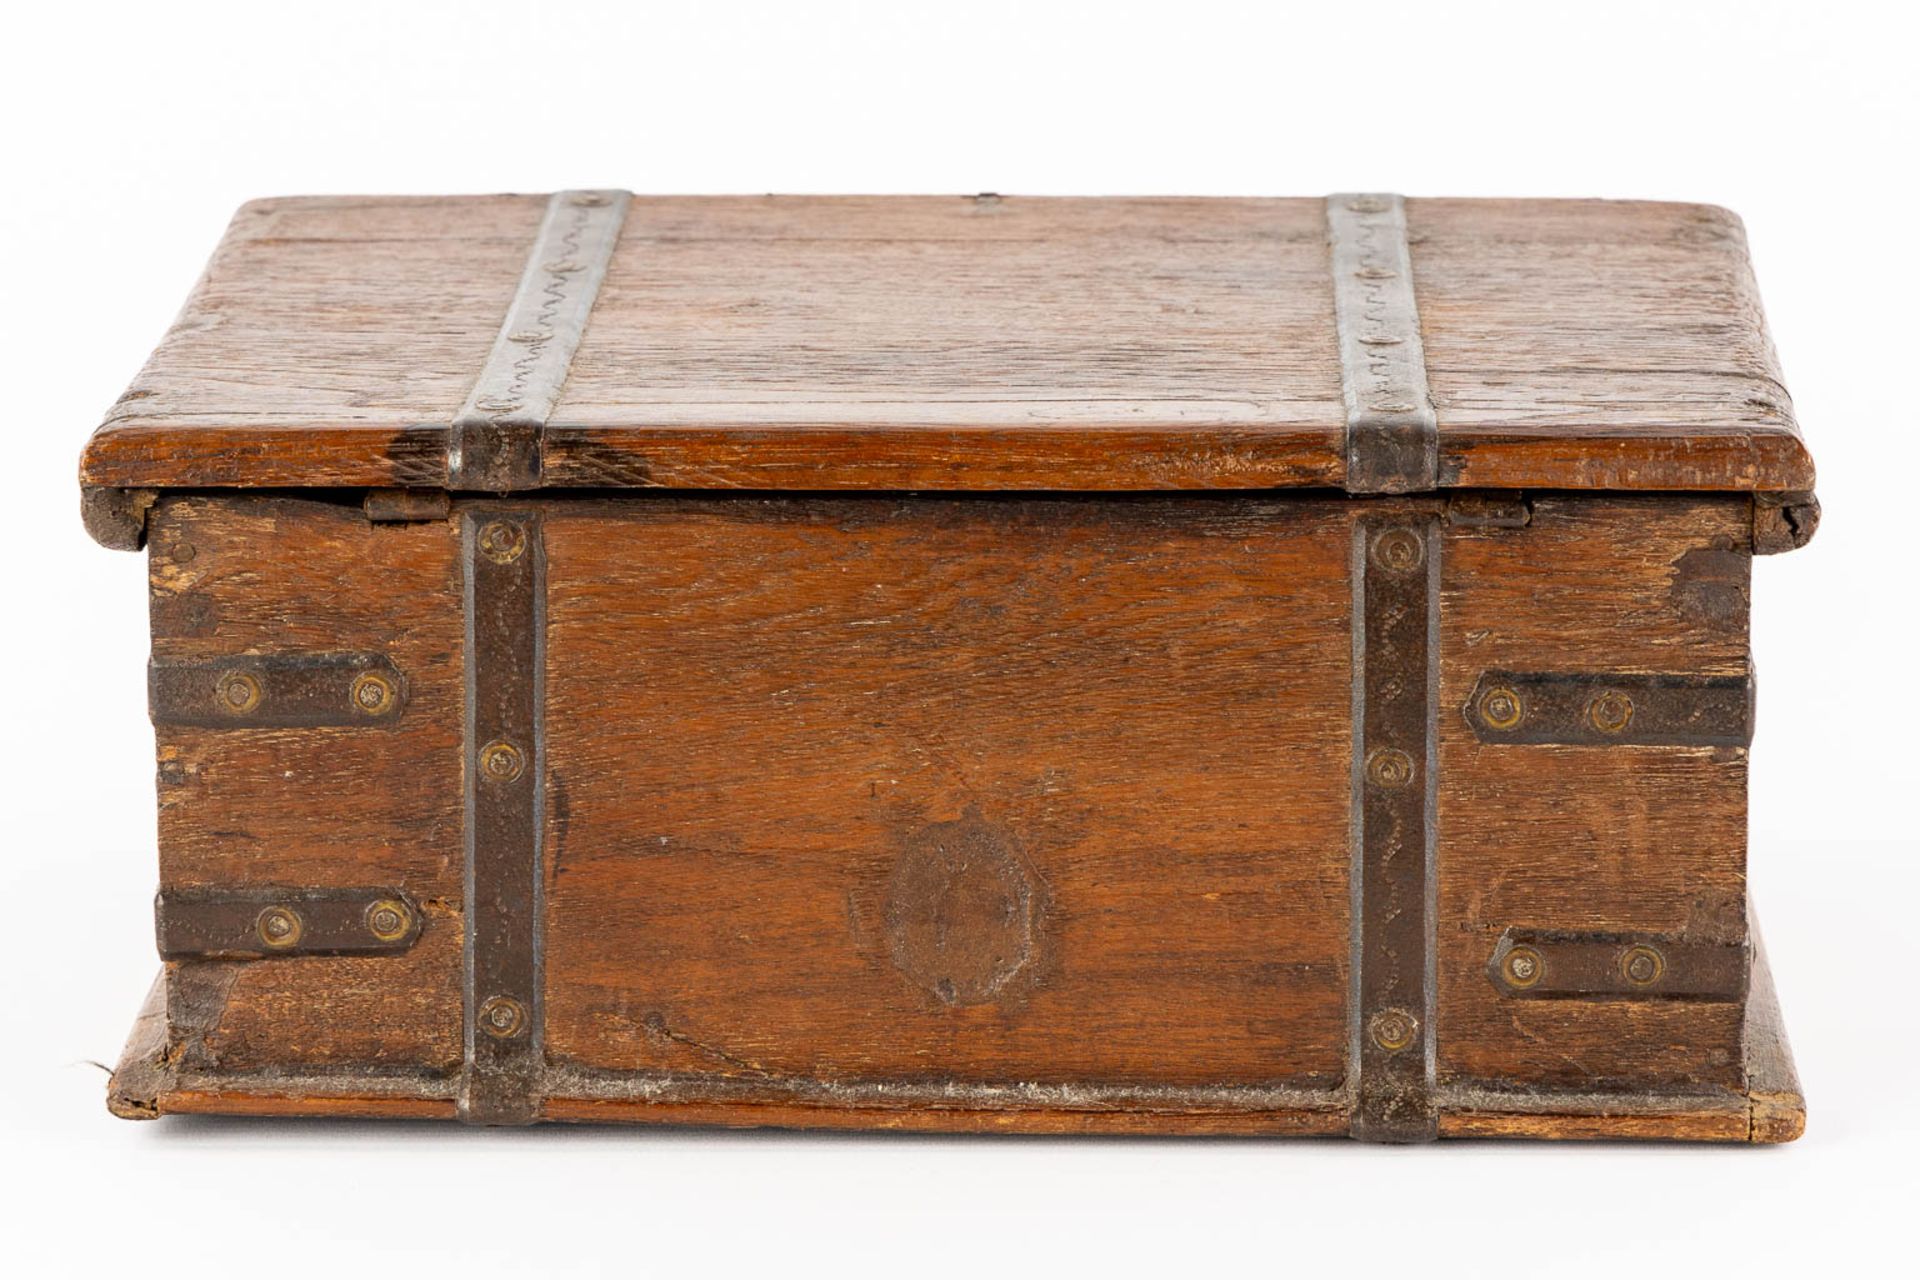 An antique money box or storage chest, oak and wrought iron, 19th C. (L:23 x W:31 x H:13 cm) - Image 5 of 13